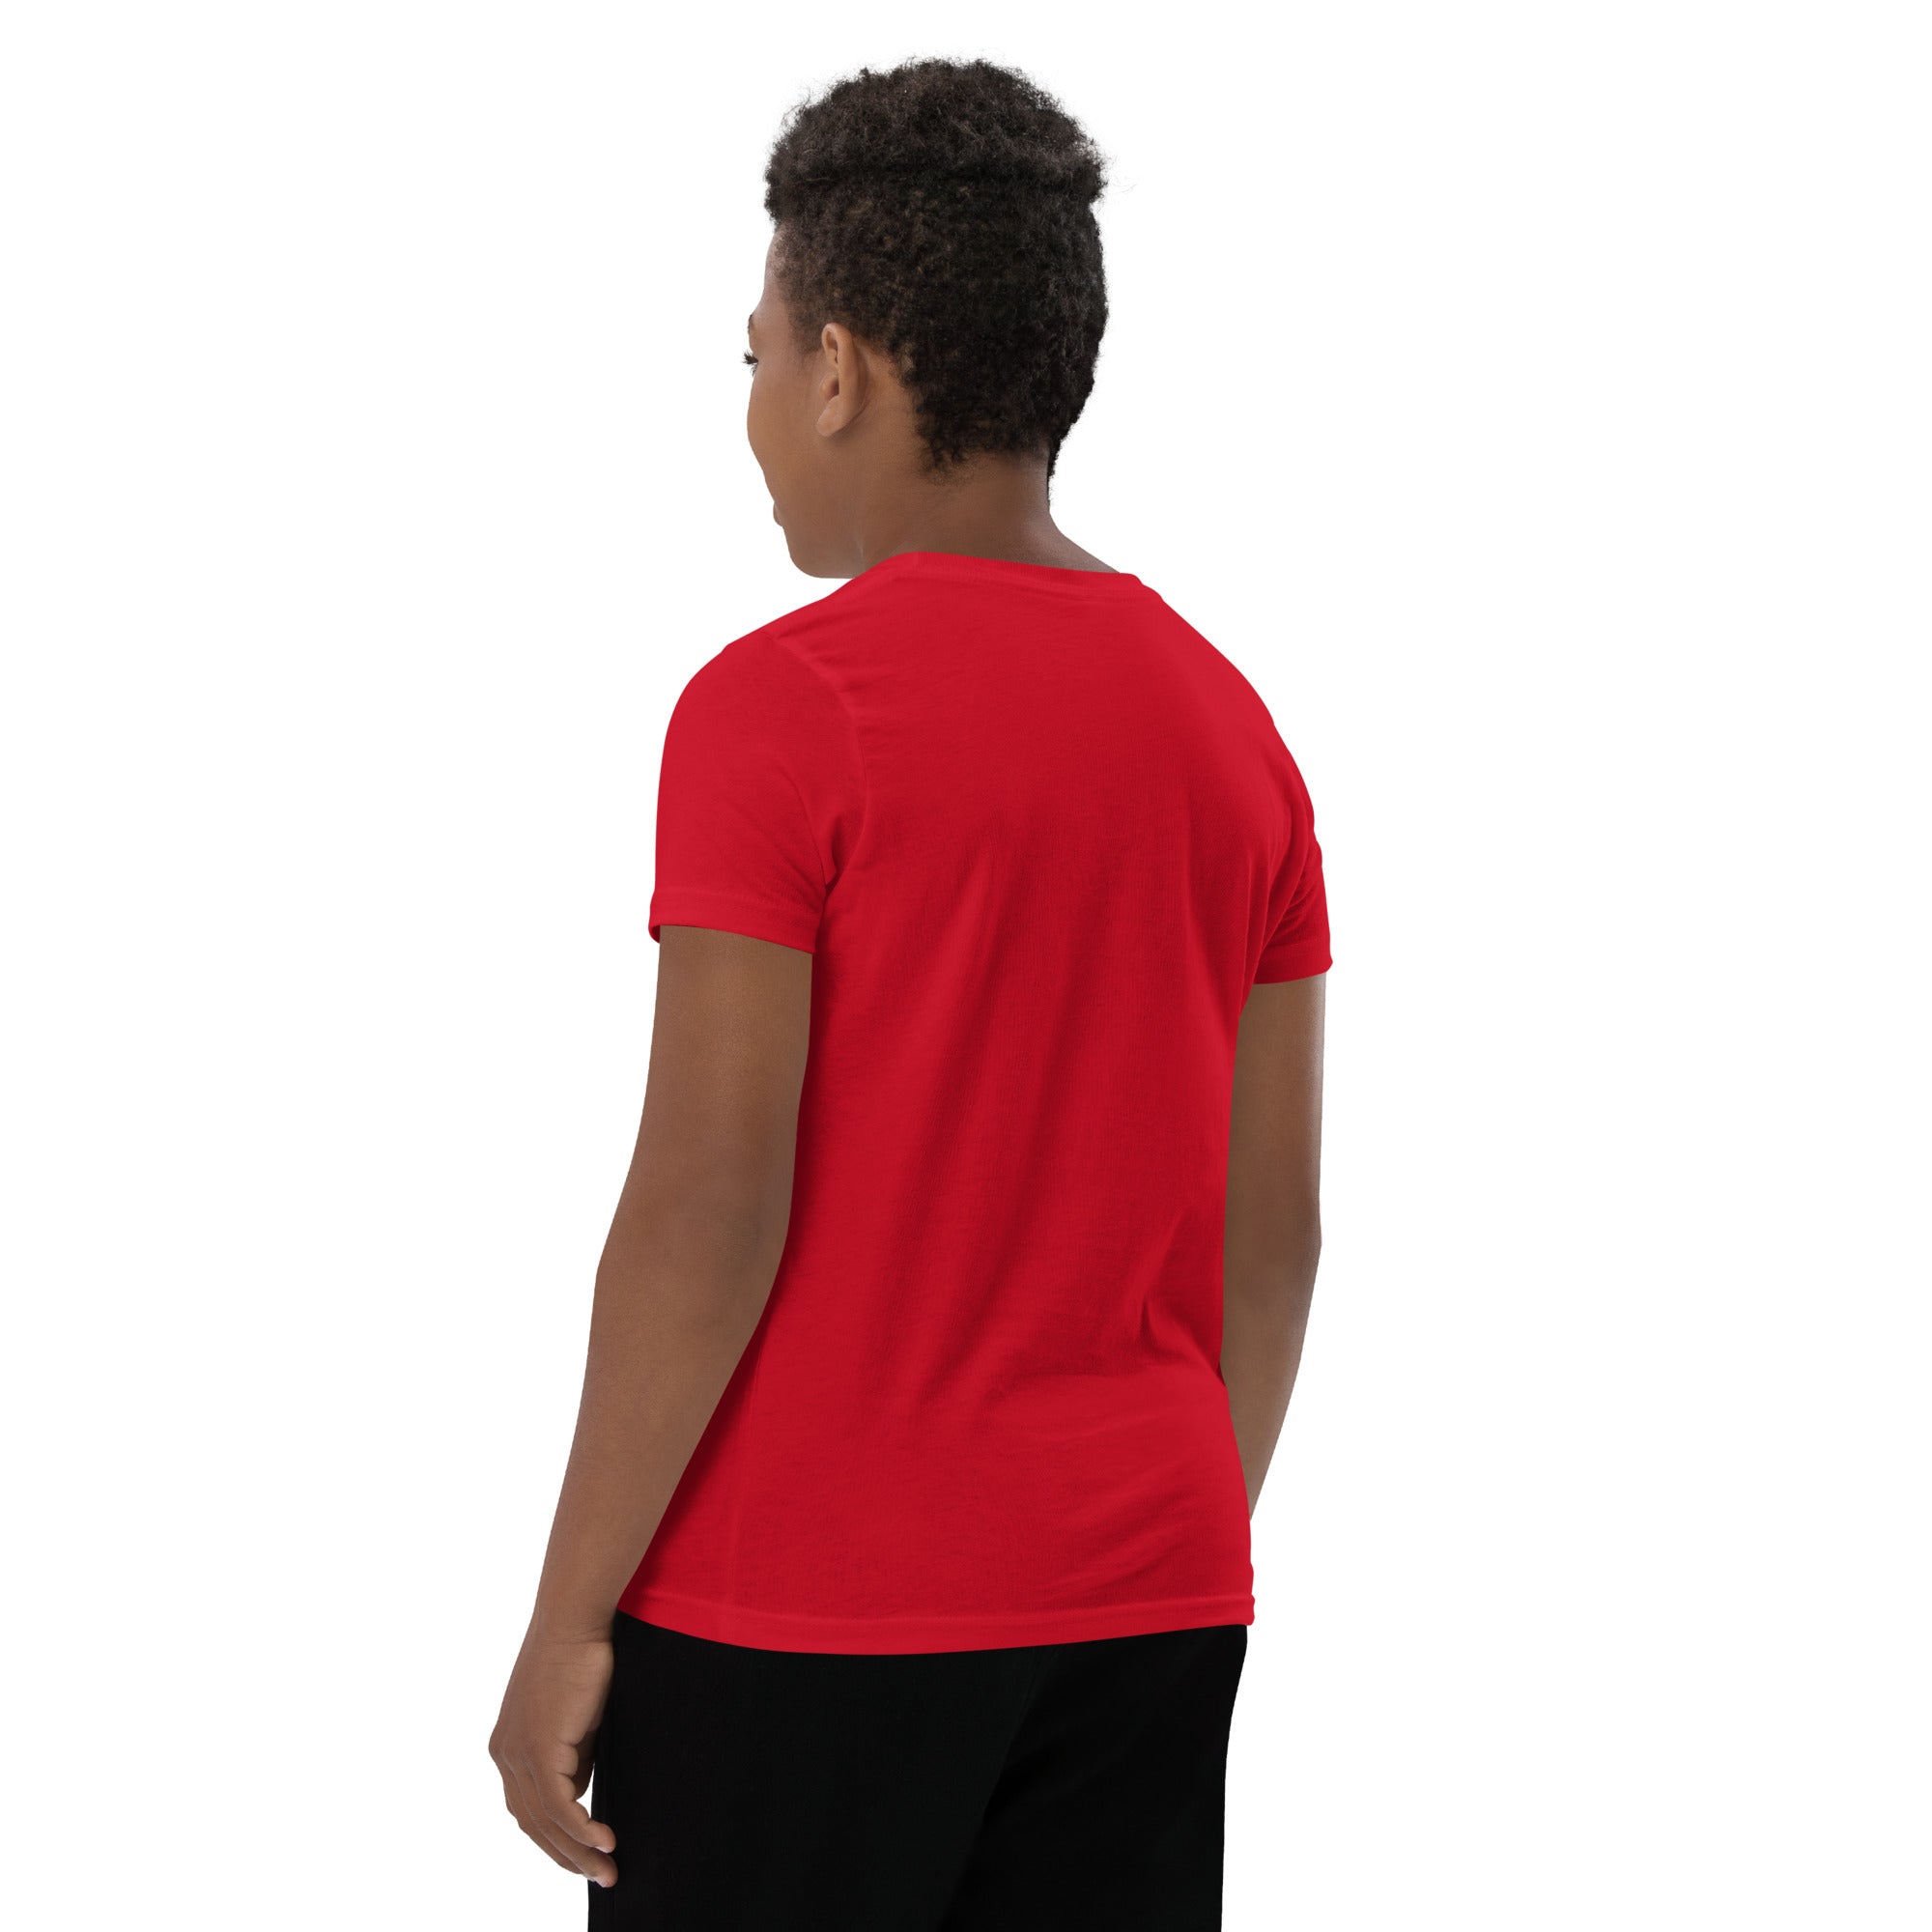 Buford Logo White - Red Youth Short Sleeve T-Shirt